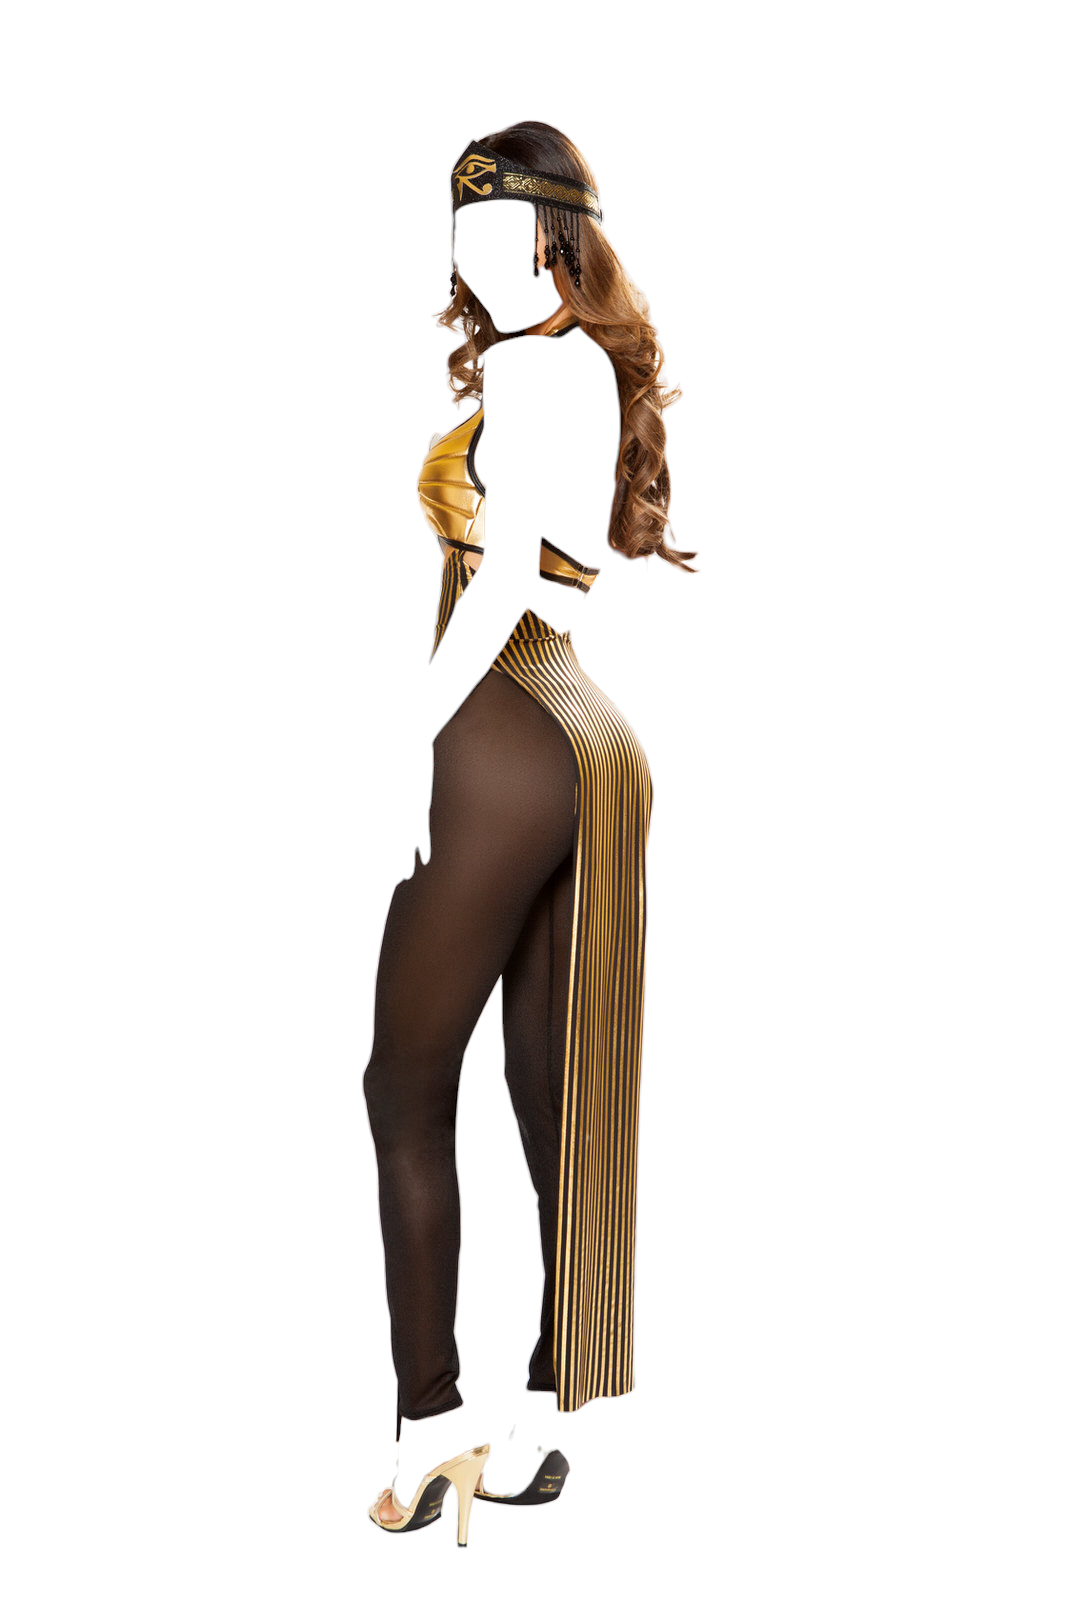 Roma Costume 3 PC Cleopatra Padded Top with Mesh Tights Black/Gold